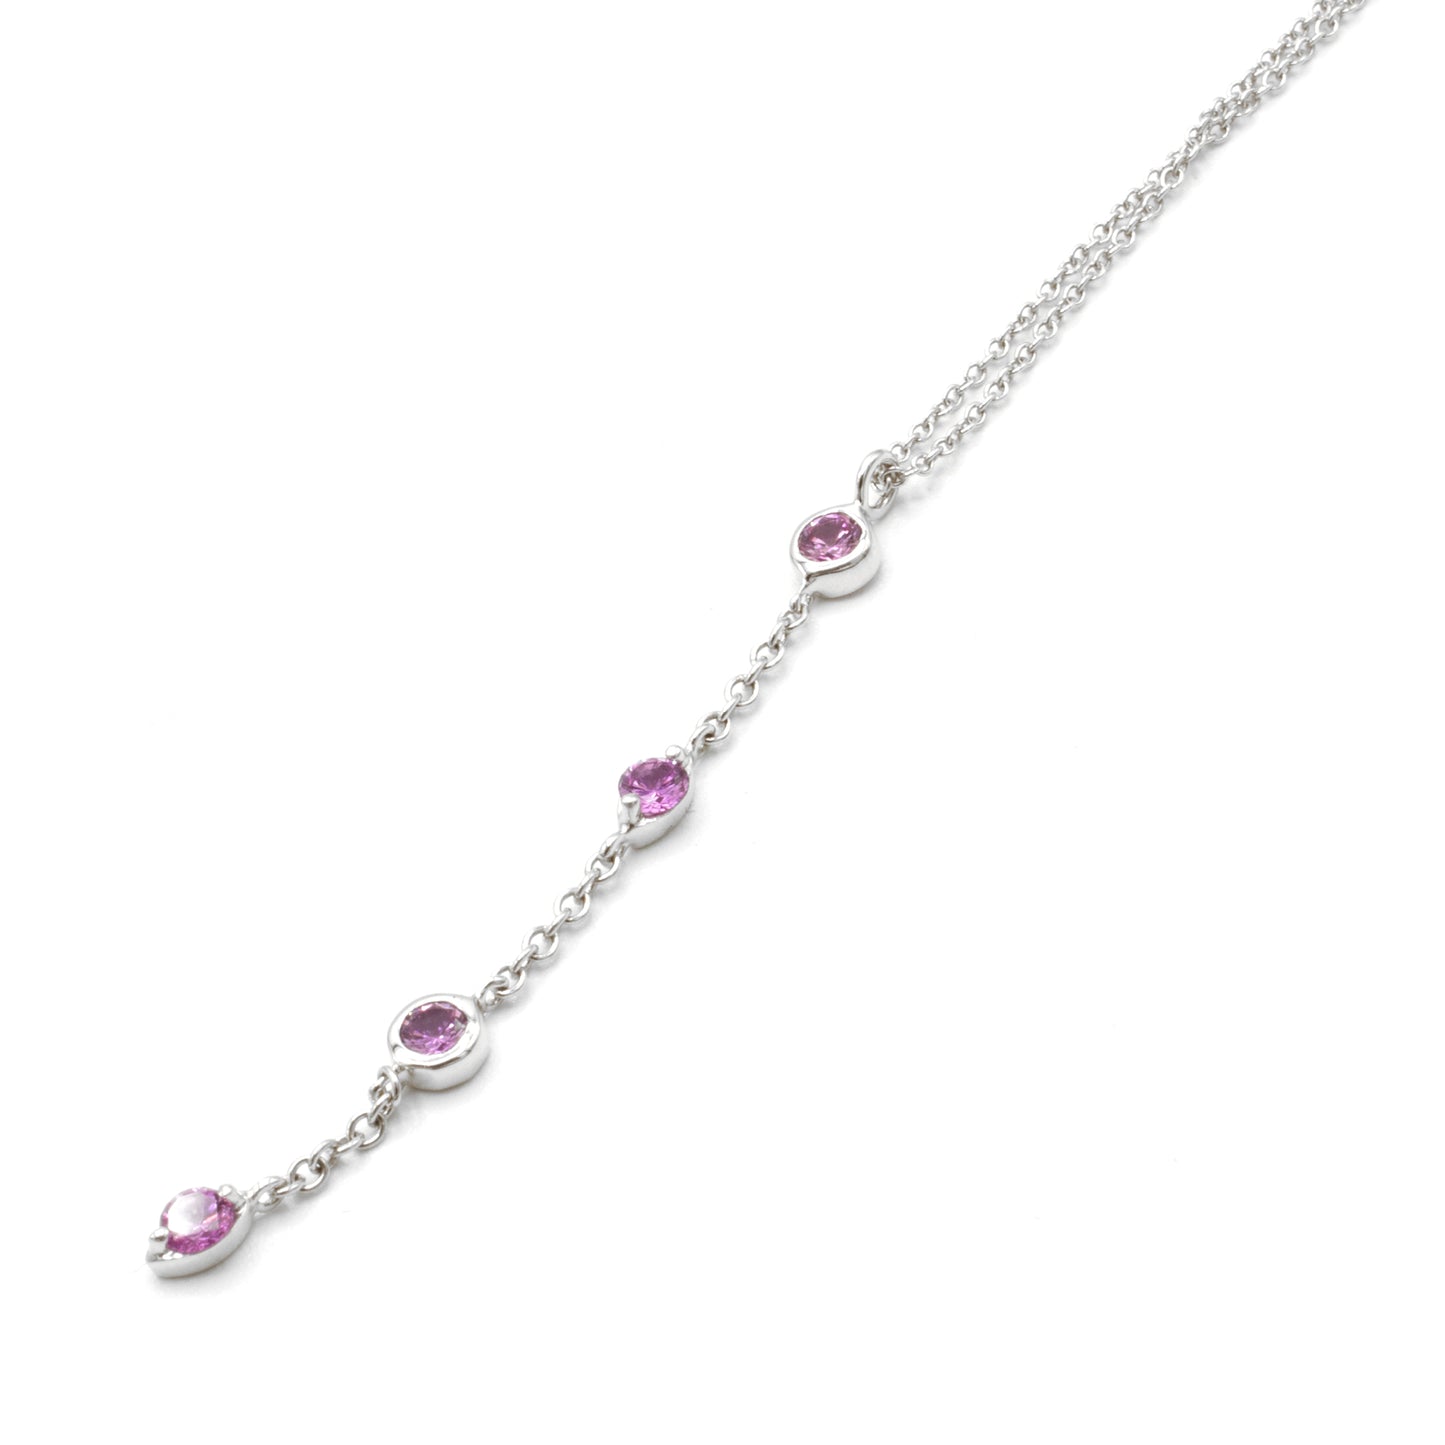 Tiffany & Co white gold x pink sapphire necklace